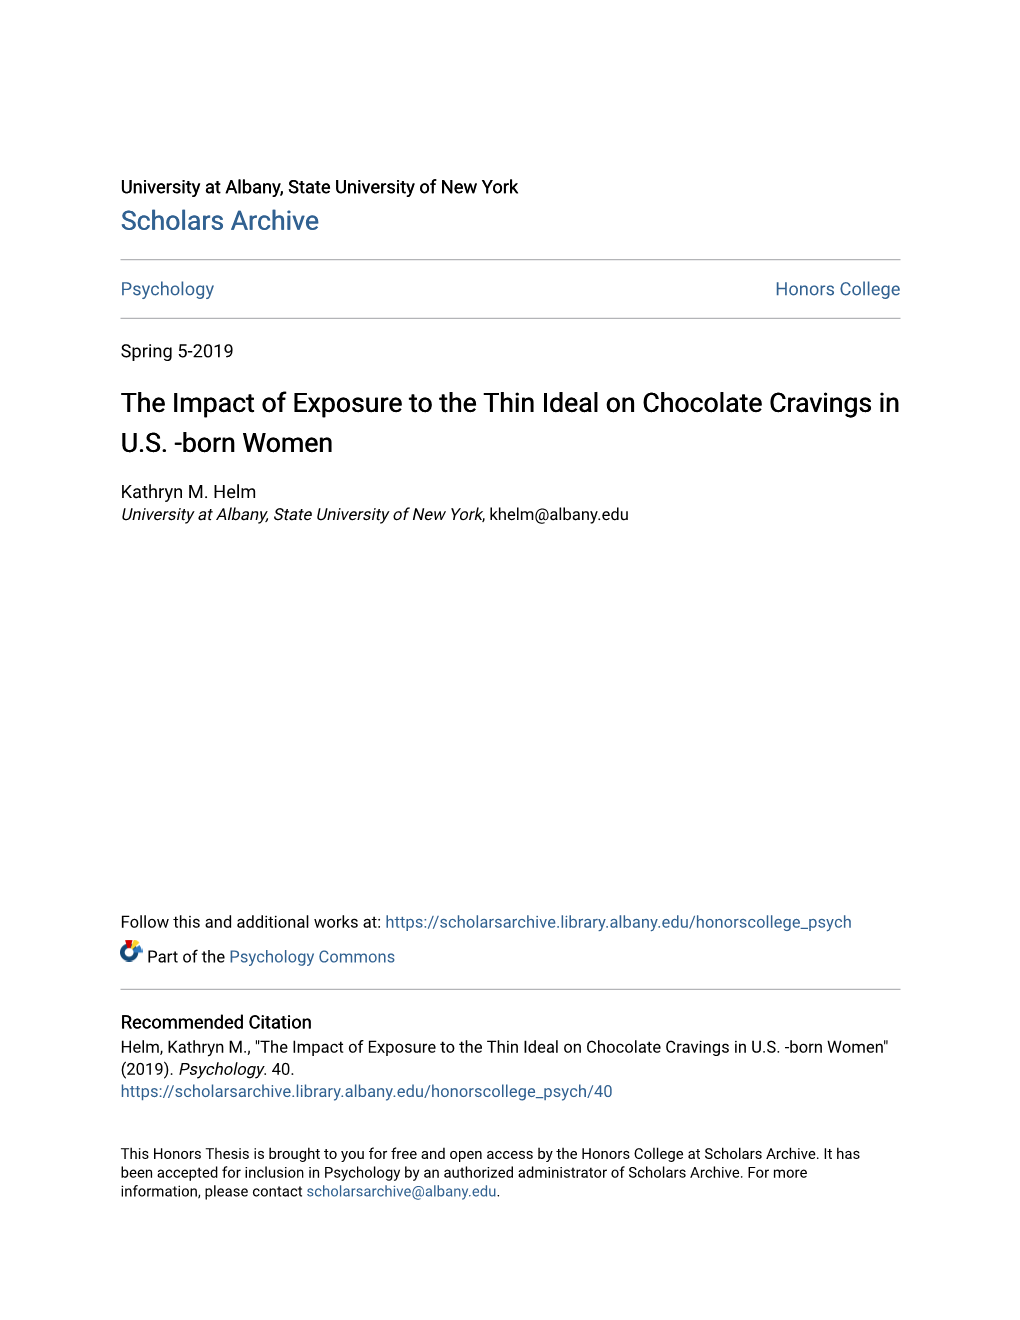 The Impact of Exposure to the Thin Ideal on Chocolate Cravings in US